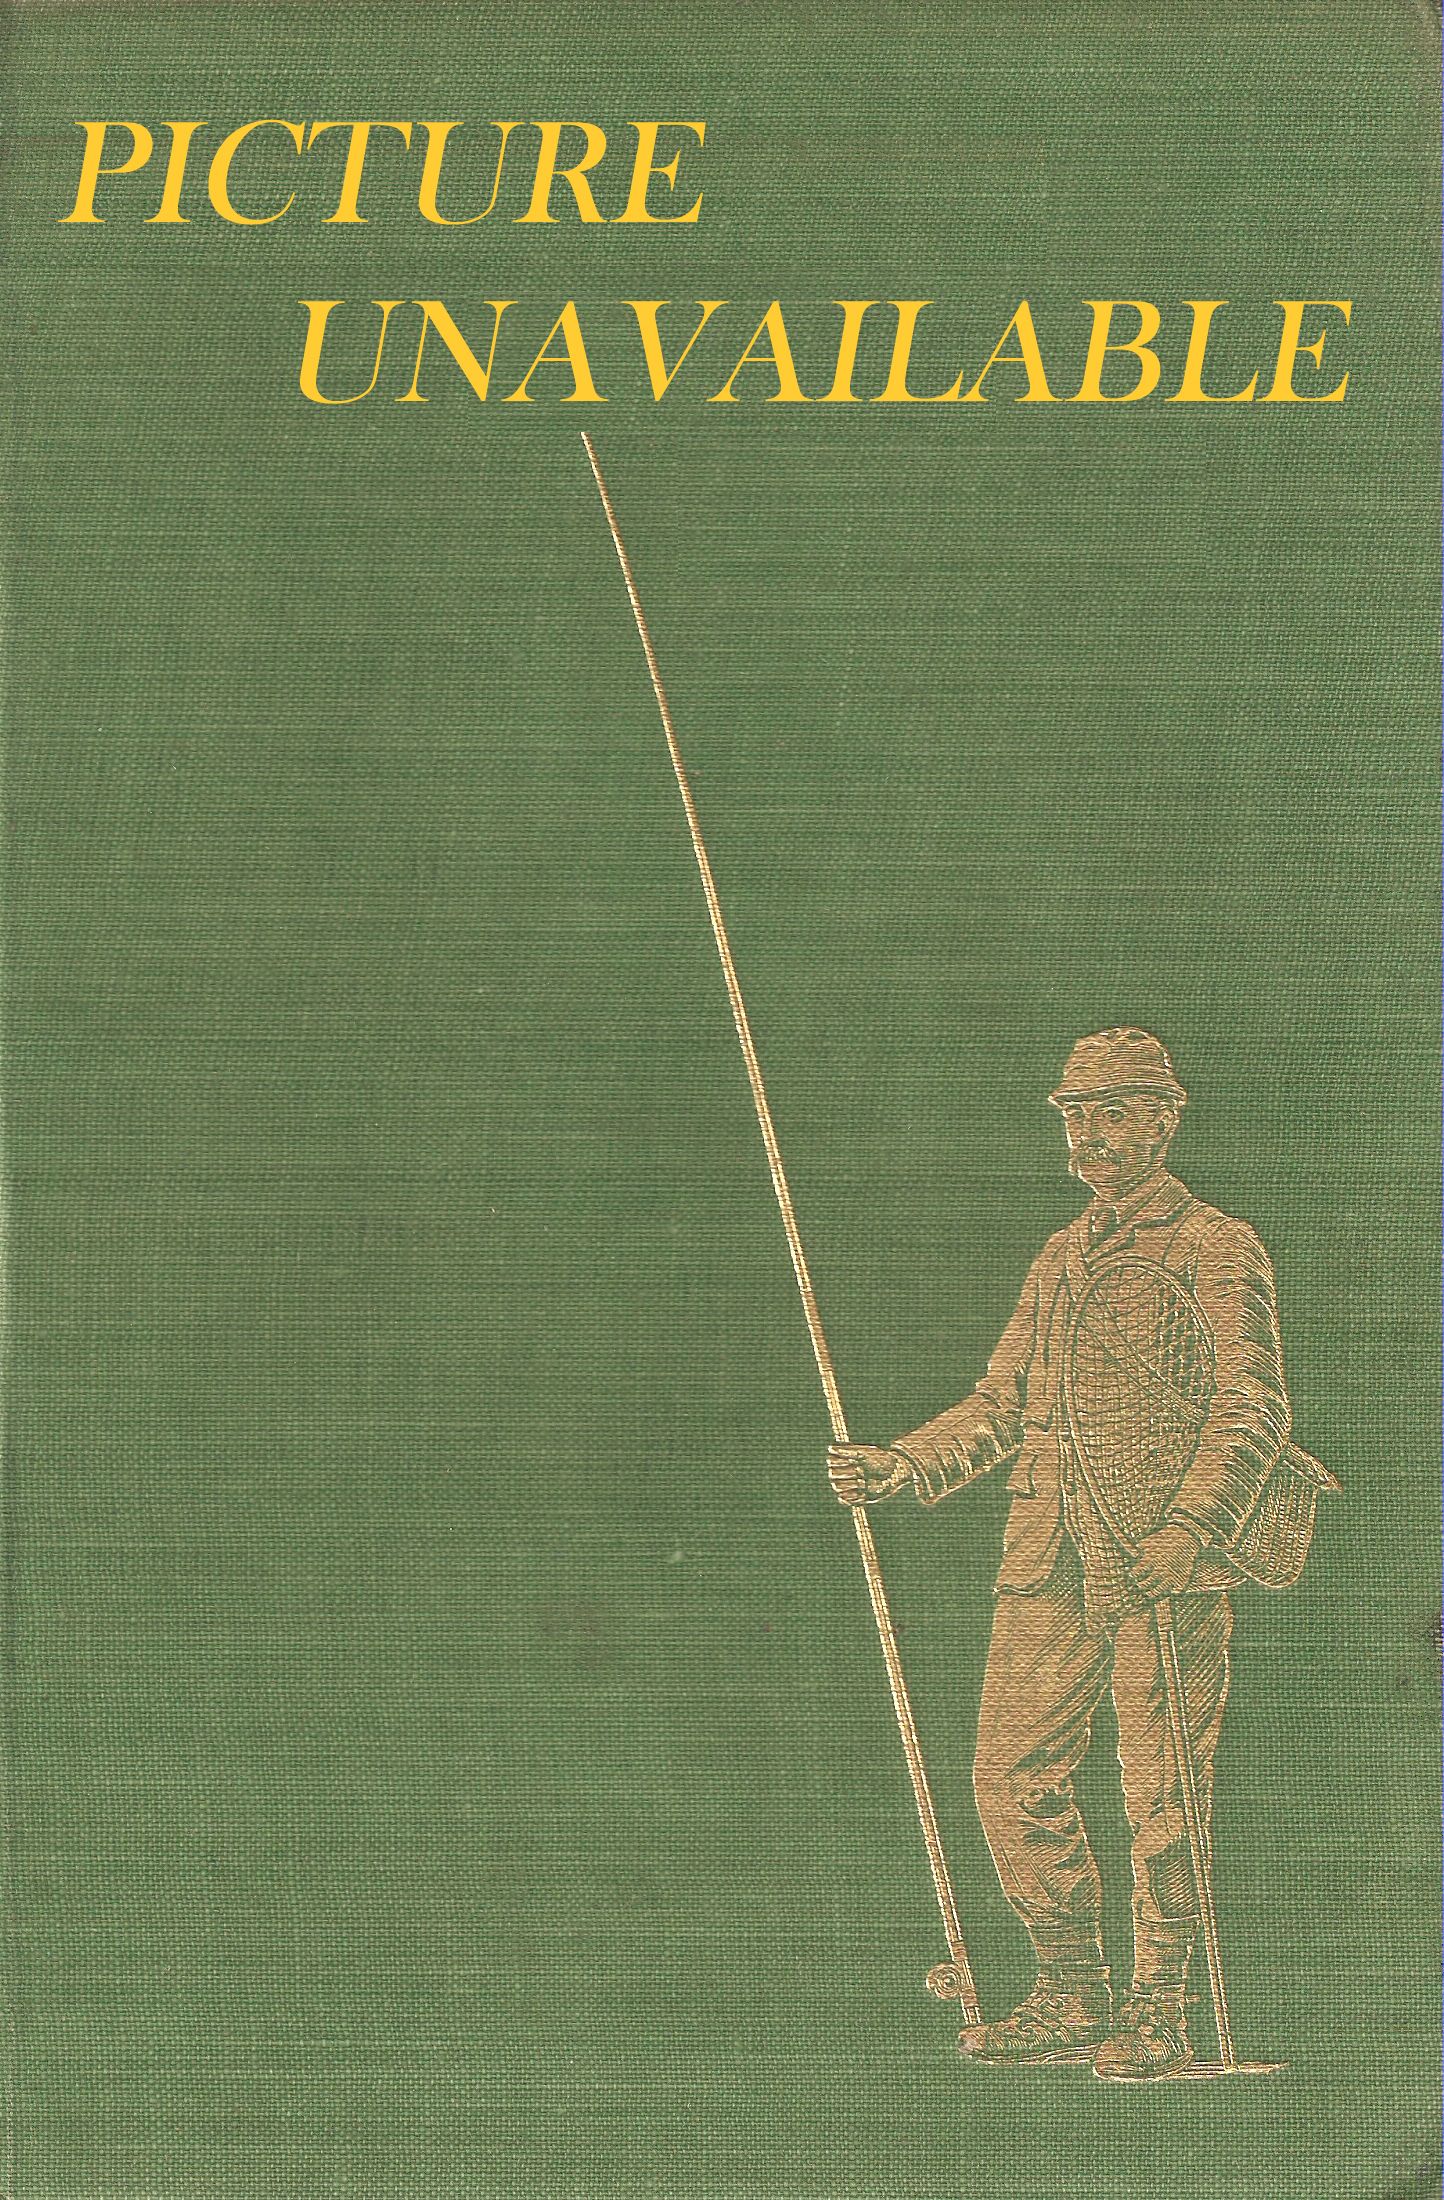 NEWNES ENCYCLOPAEDIA OF ANGLING: A UNIQUE REFERENCE TO THE WHOLE SPORT OF  ANGLING INCLUDING A GREAT VARIETY OF INFORMATION CONCERNING FISHING IN  GREAT BRITAIN AND THE REPUBLIC OF IRELAND. Edited and compiled by A.  Norman Marston.